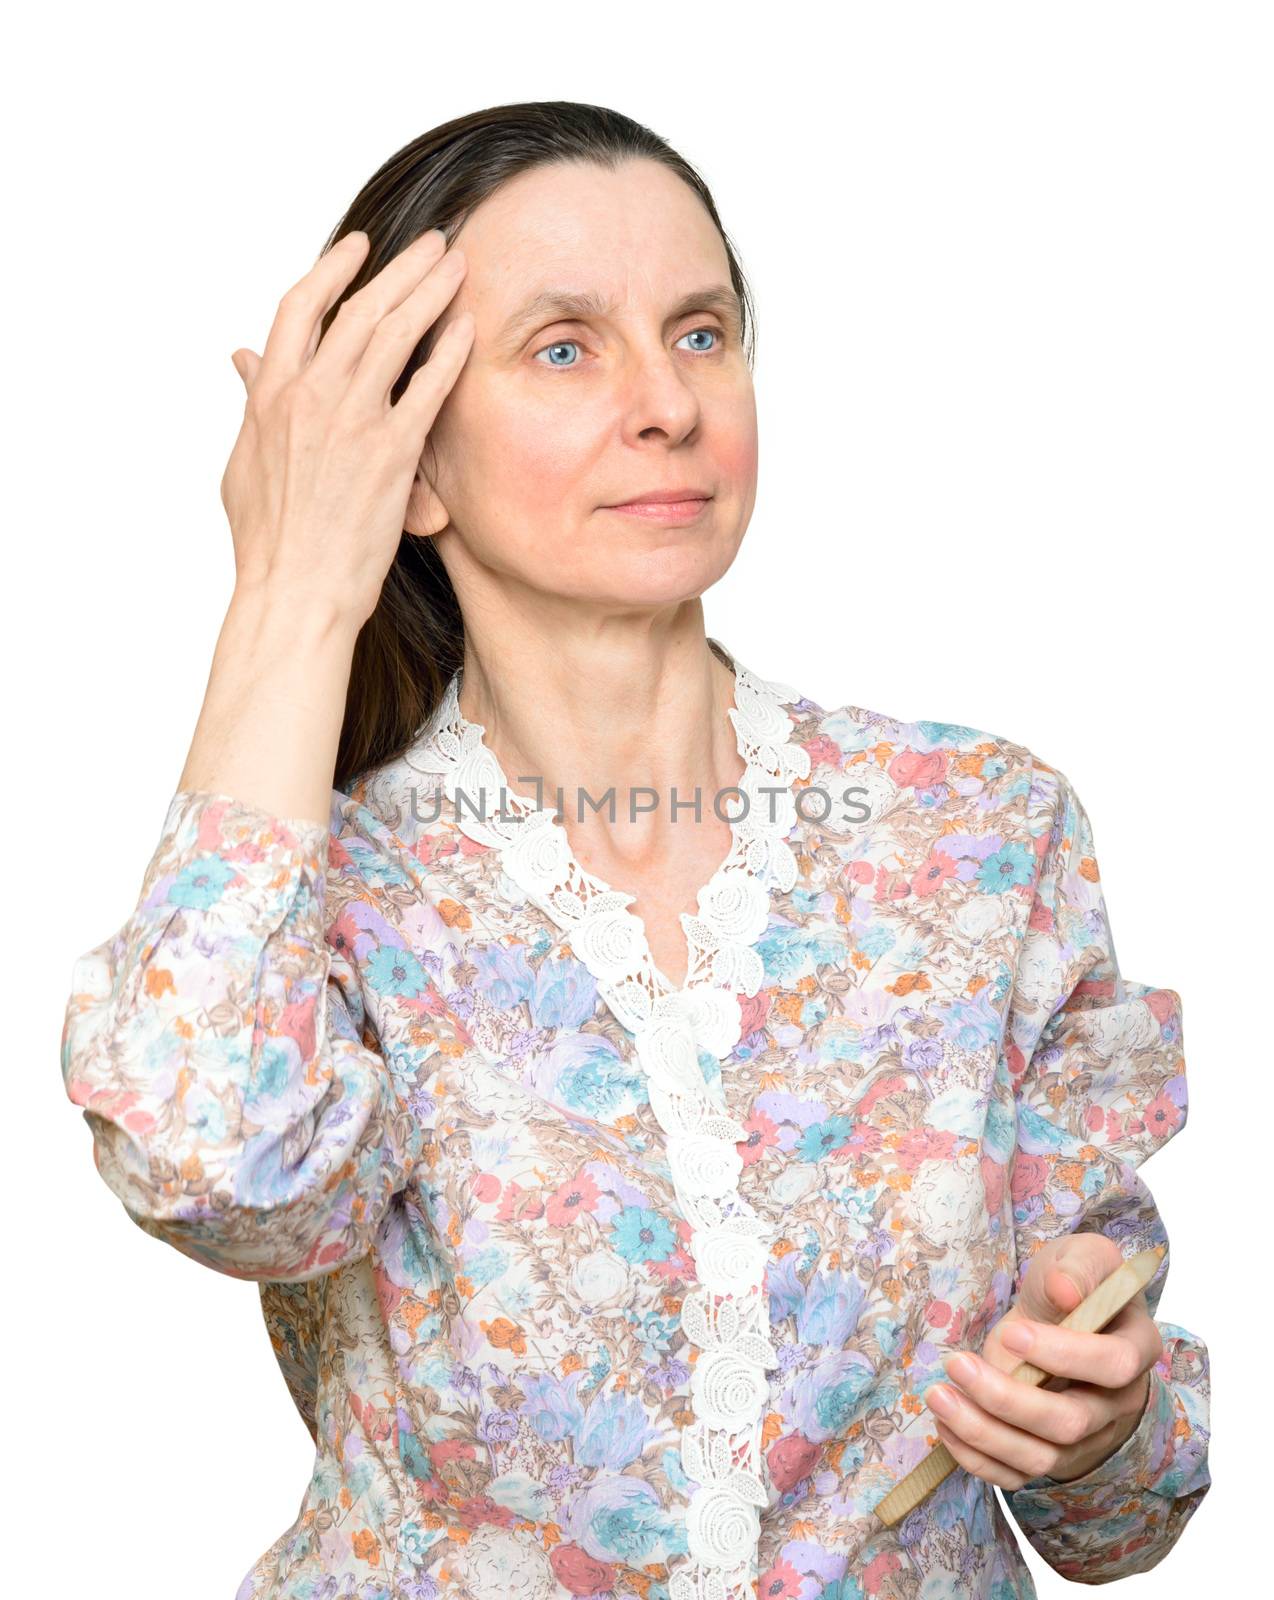 Adult woman combing long brown hair with a wooden comb, isolated on white background